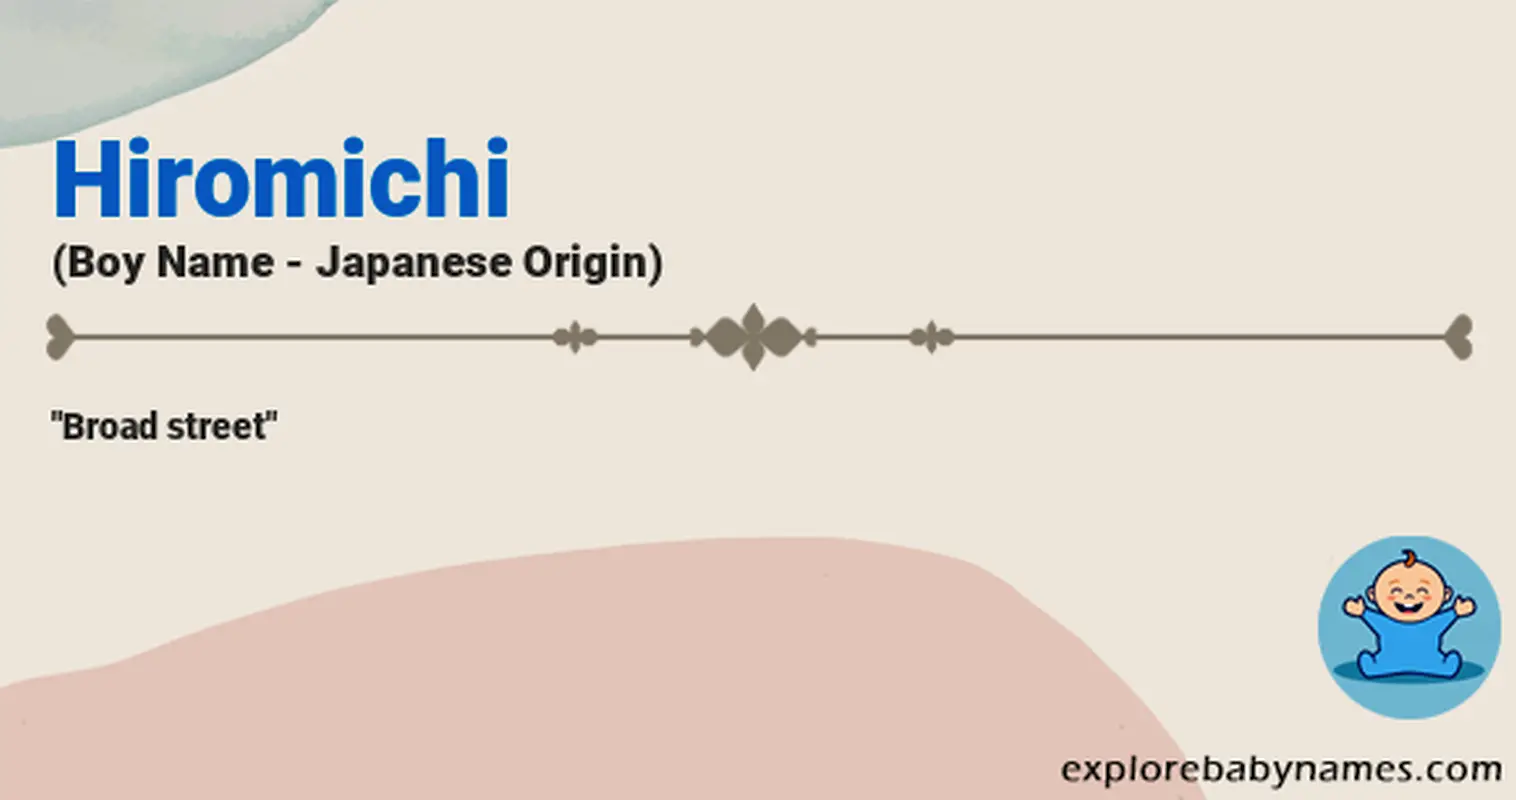 Meaning of Hiromichi